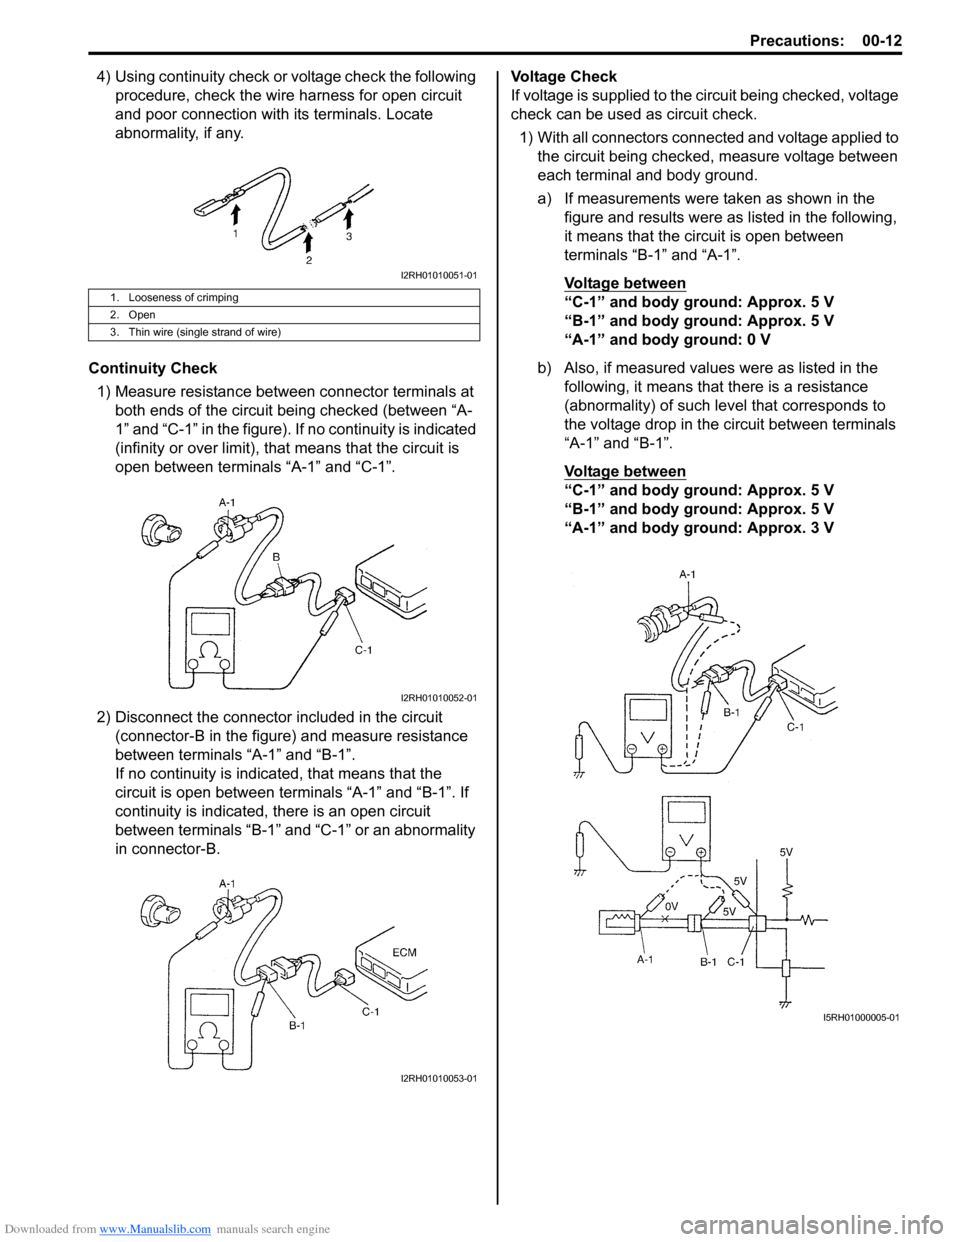 SUZUKI SWIFT 2006 2.G Service Workshop Manual Downloaded from www.Manualslib.com manuals search engine Precautions: 00-12
4) Using continuity check or voltage check the following procedure, check the wire harness for open circuit 
and poor connec